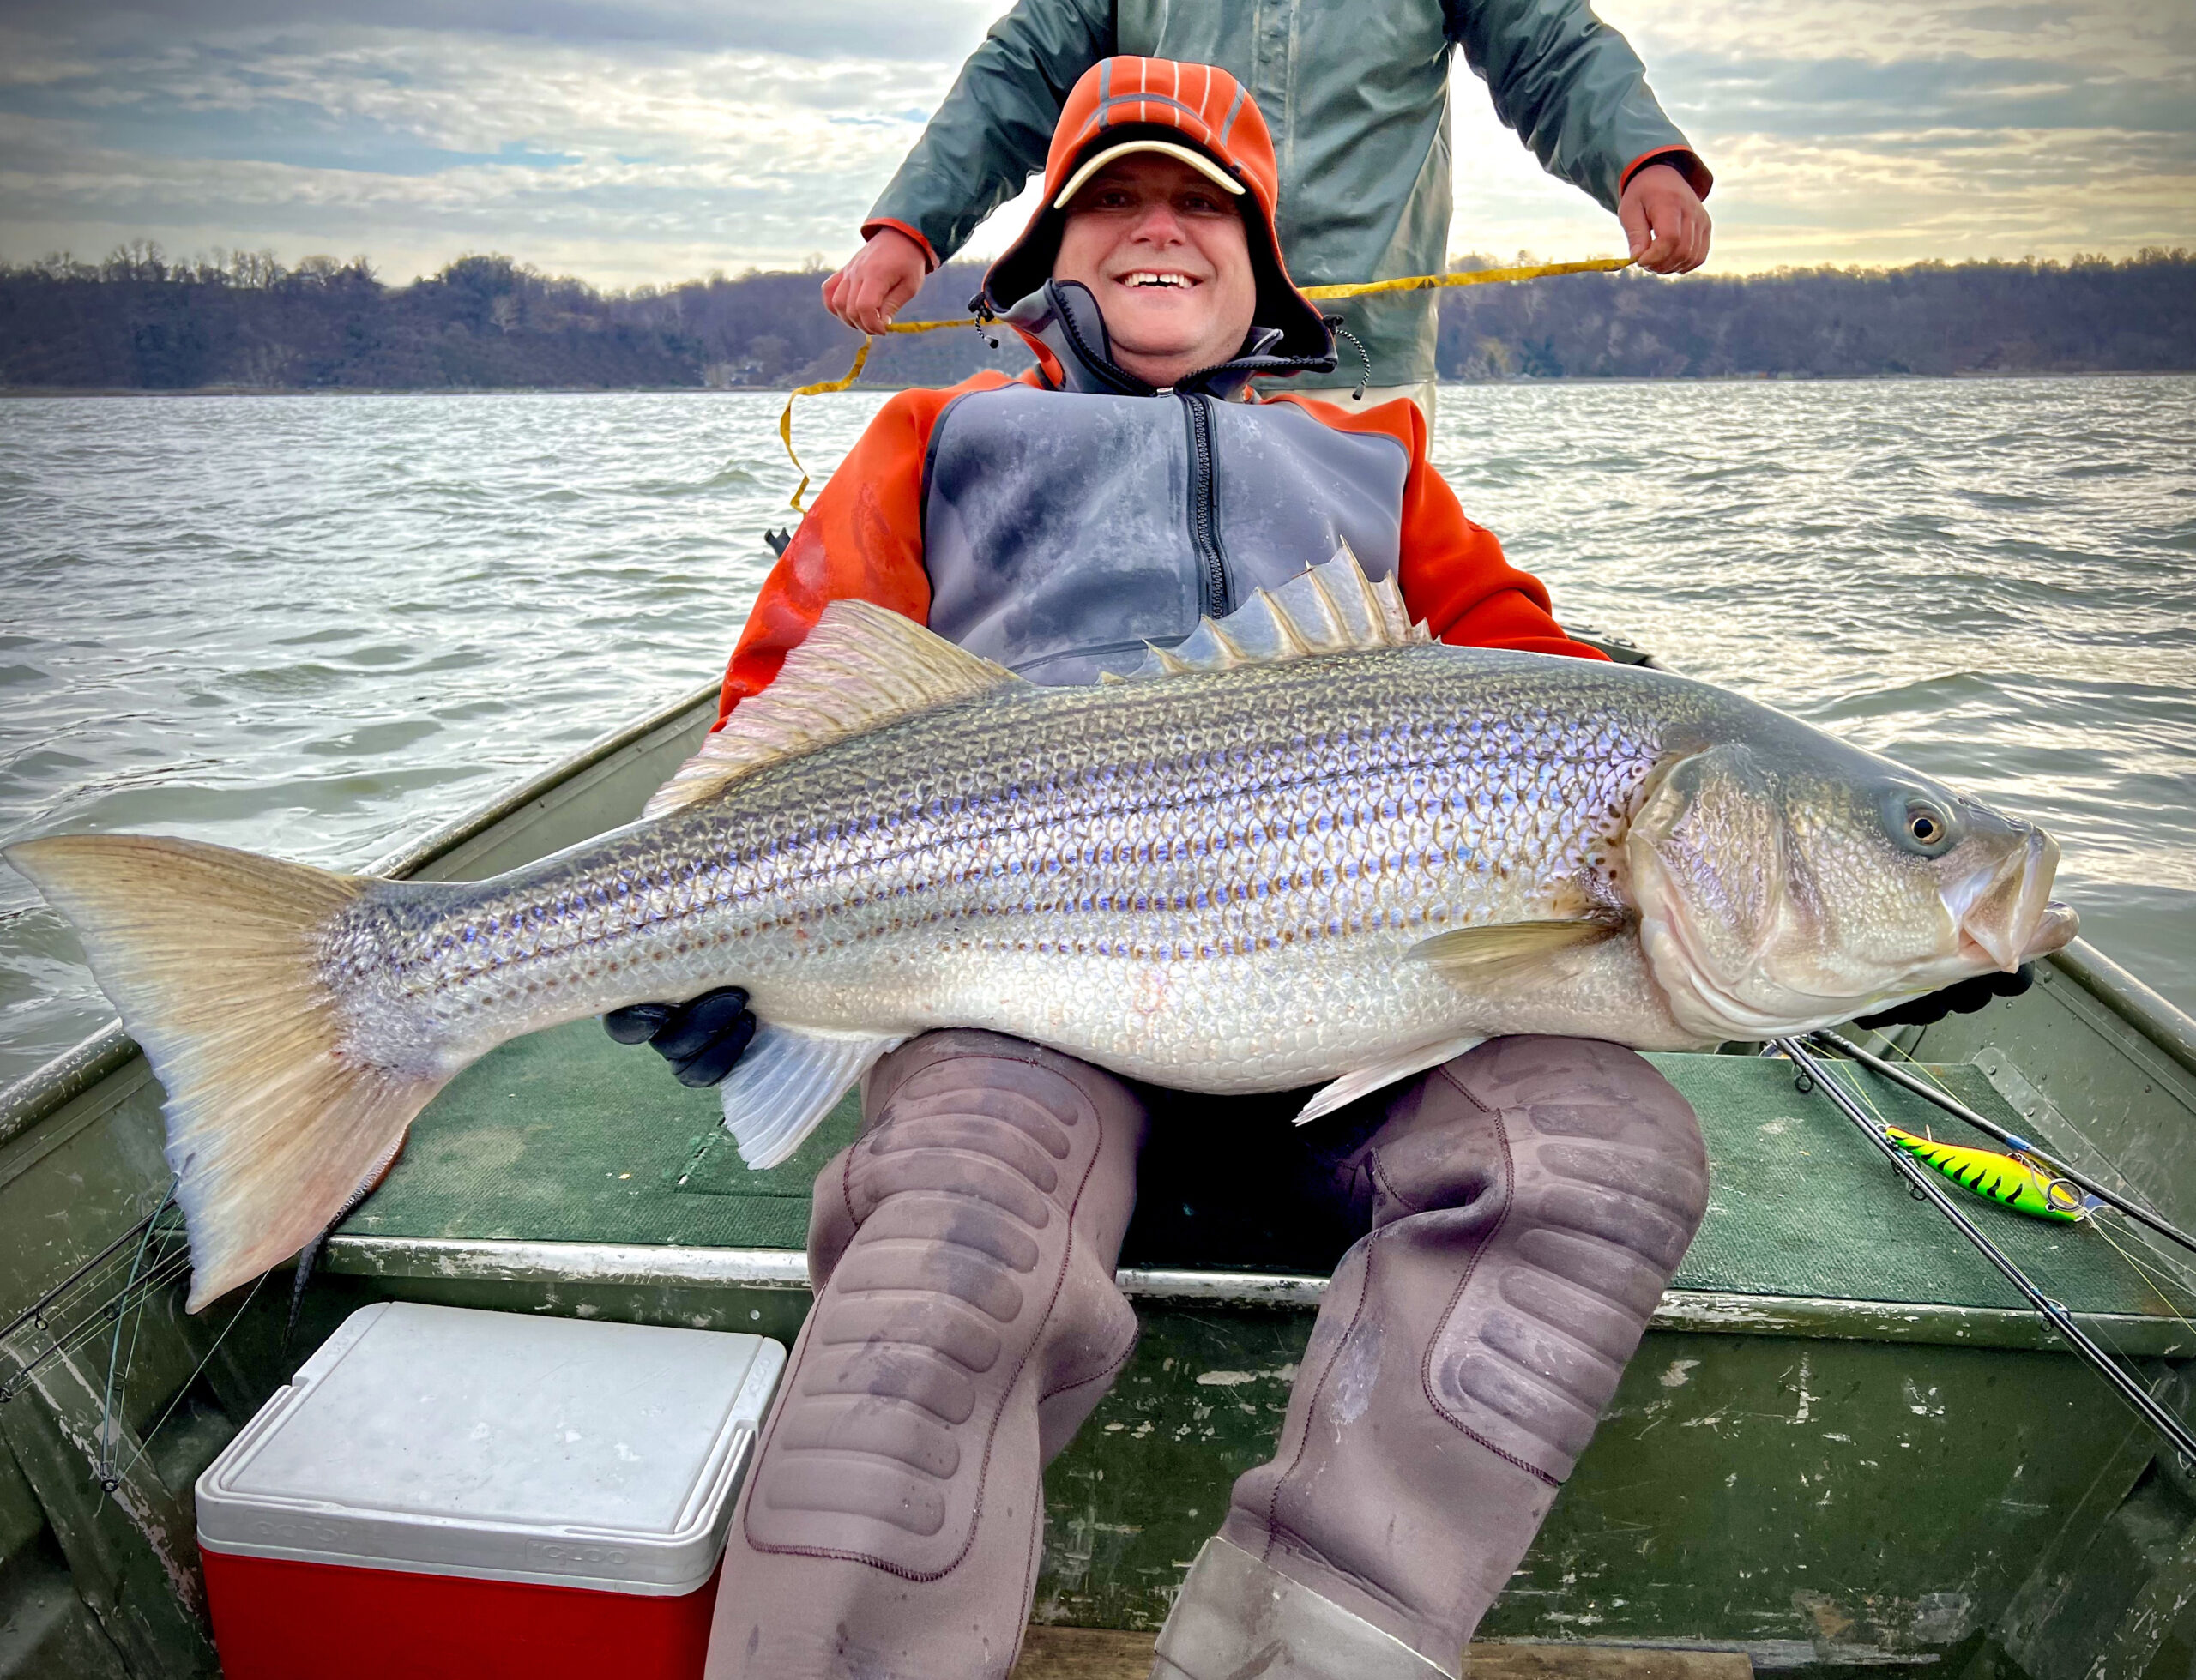 Dan Radman with a striper that weighed an estimated 67.2 pounds. 